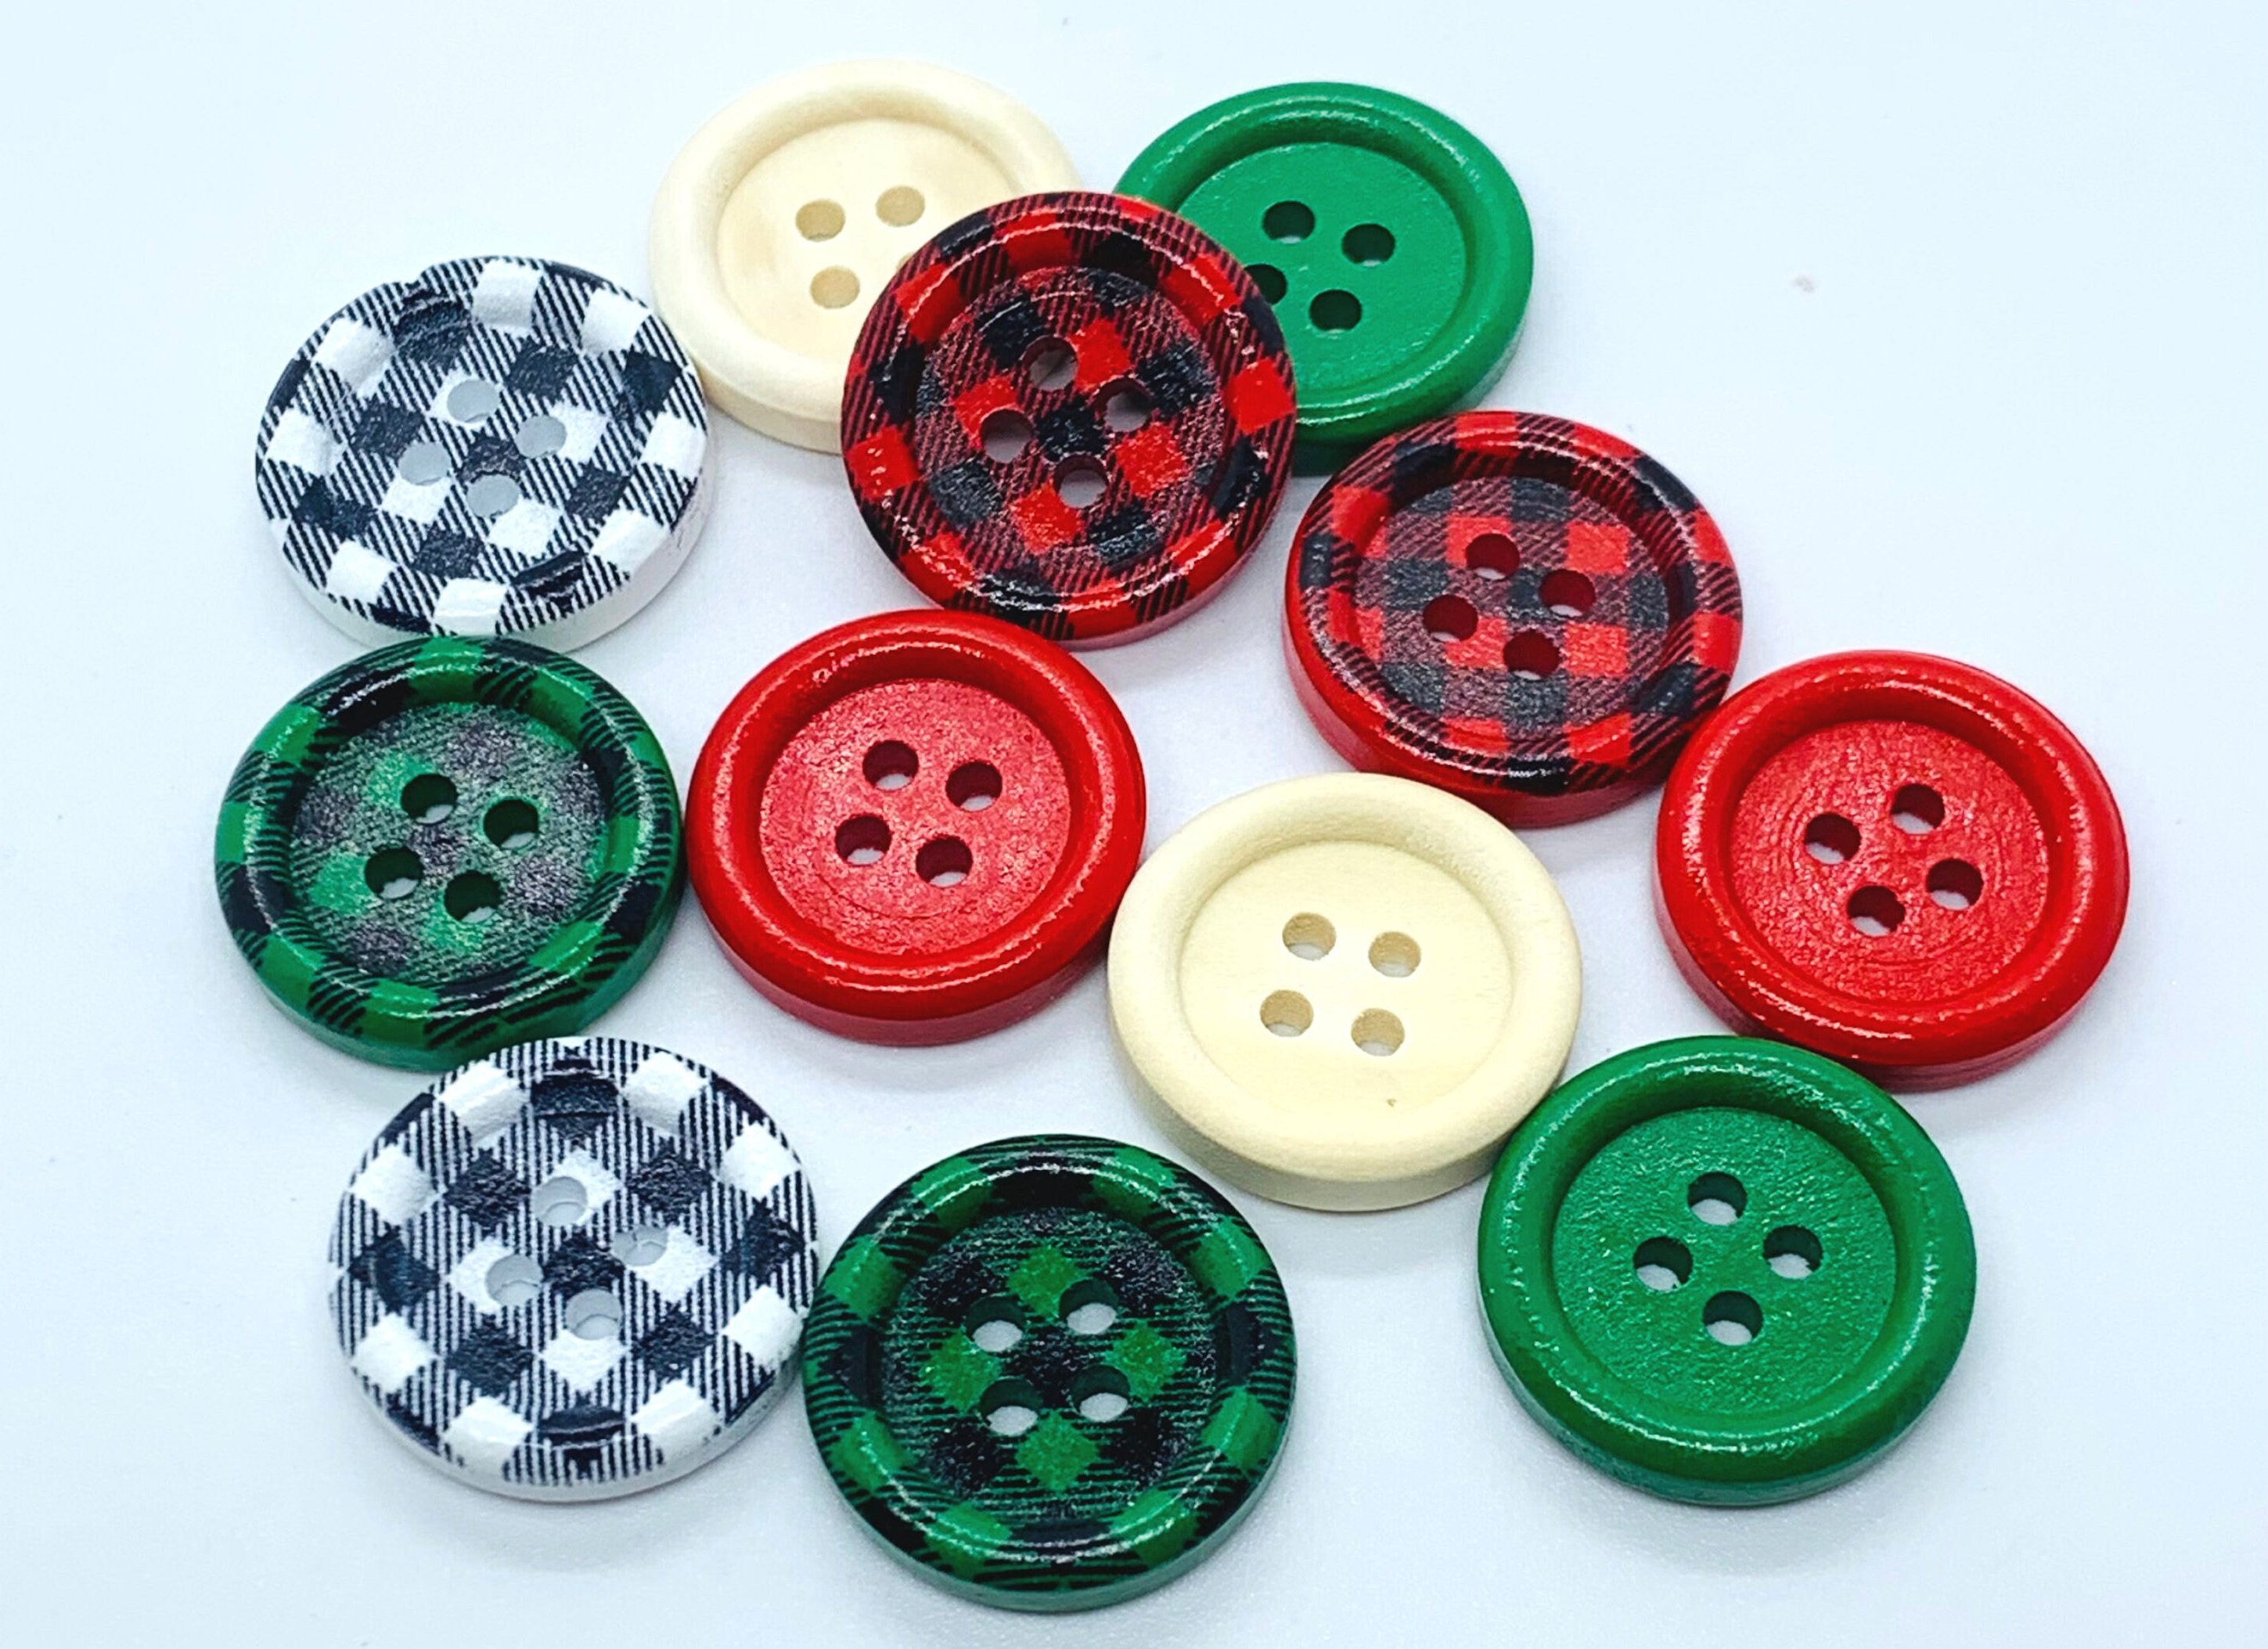 Elder Emo button bundle pack checkered buttons emo hair pin emo kid buttons